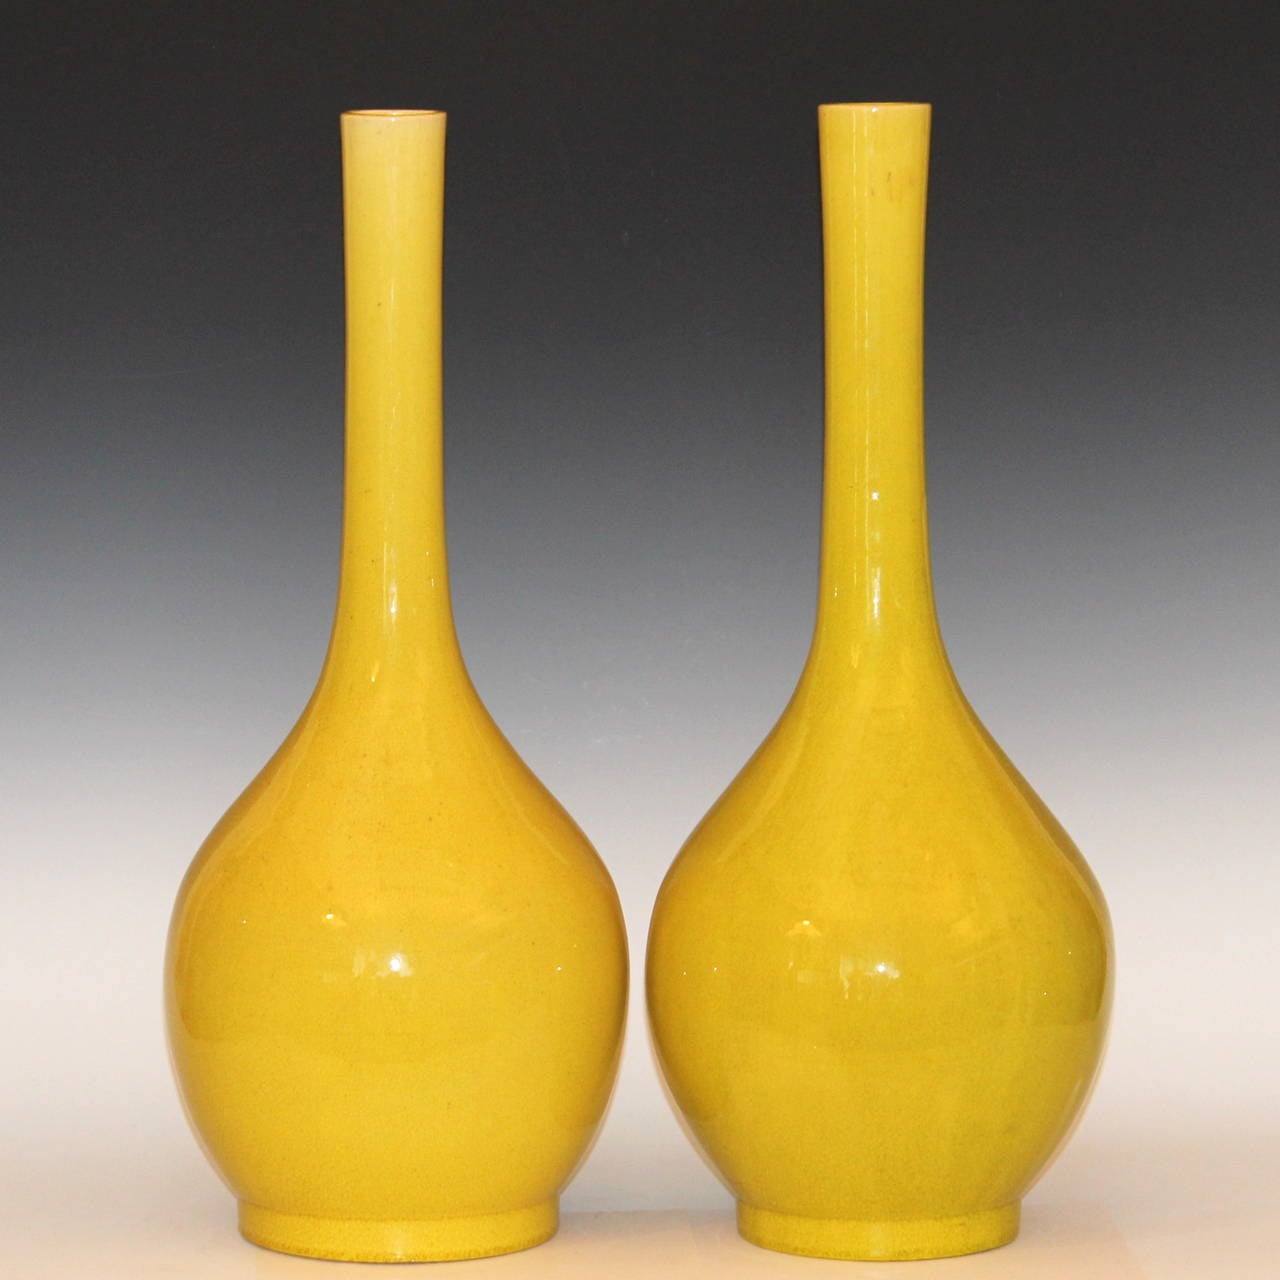 Large Pair of Antique Kyoto Pottery Bottle Vases in Acid Yellow Crackle Glaze 2